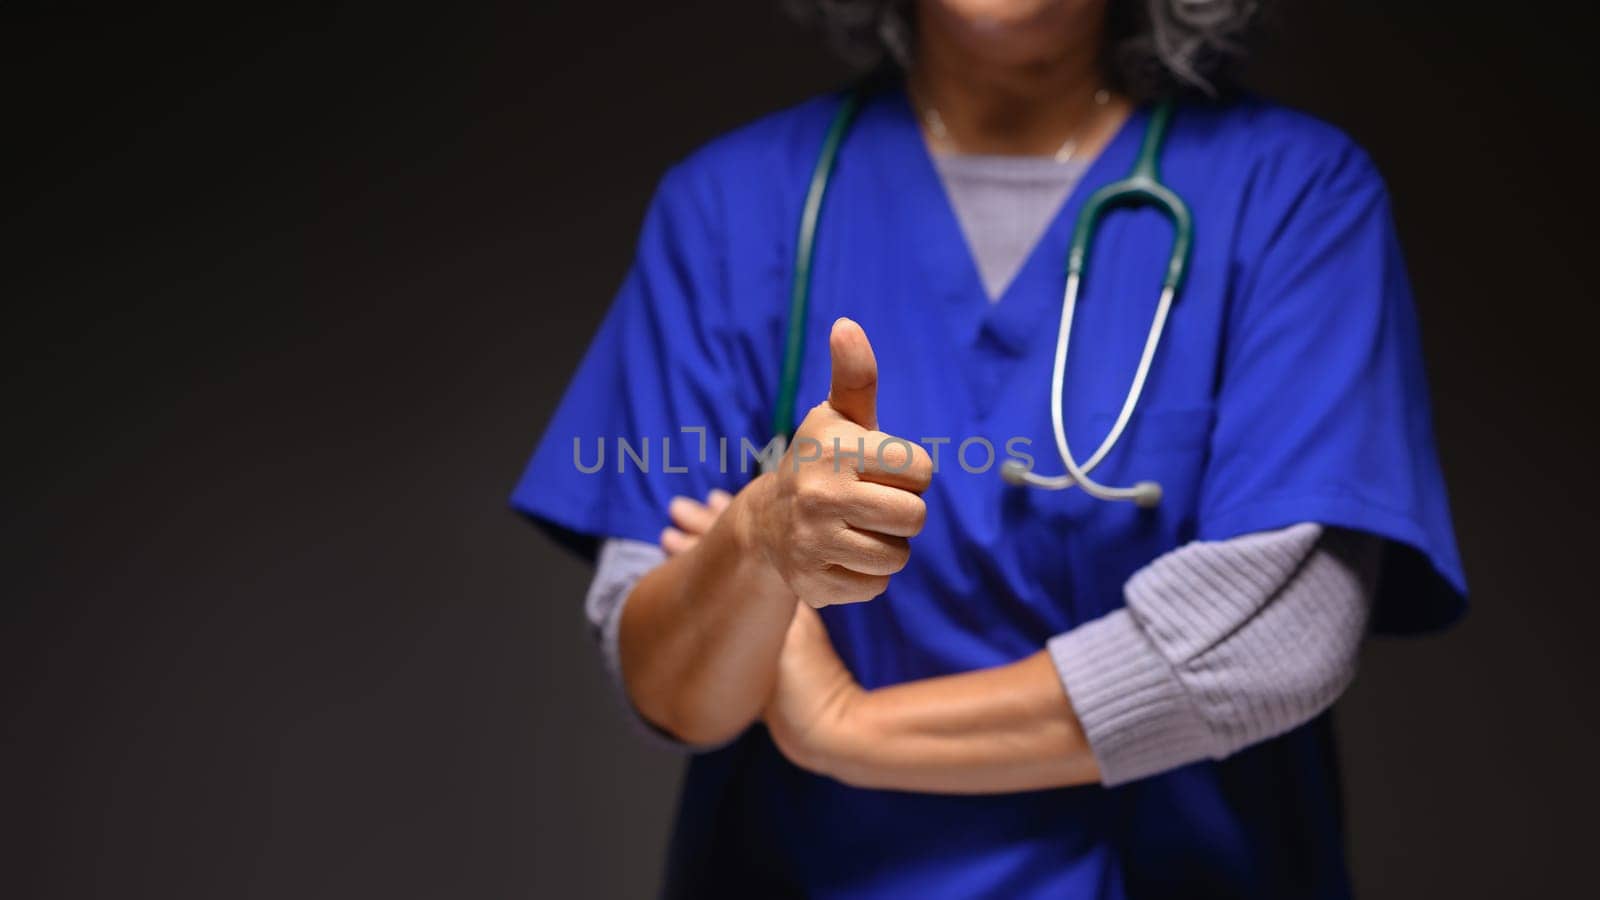 Mature doctor in medical uniform showing thumbs up over black background. Health care concept.